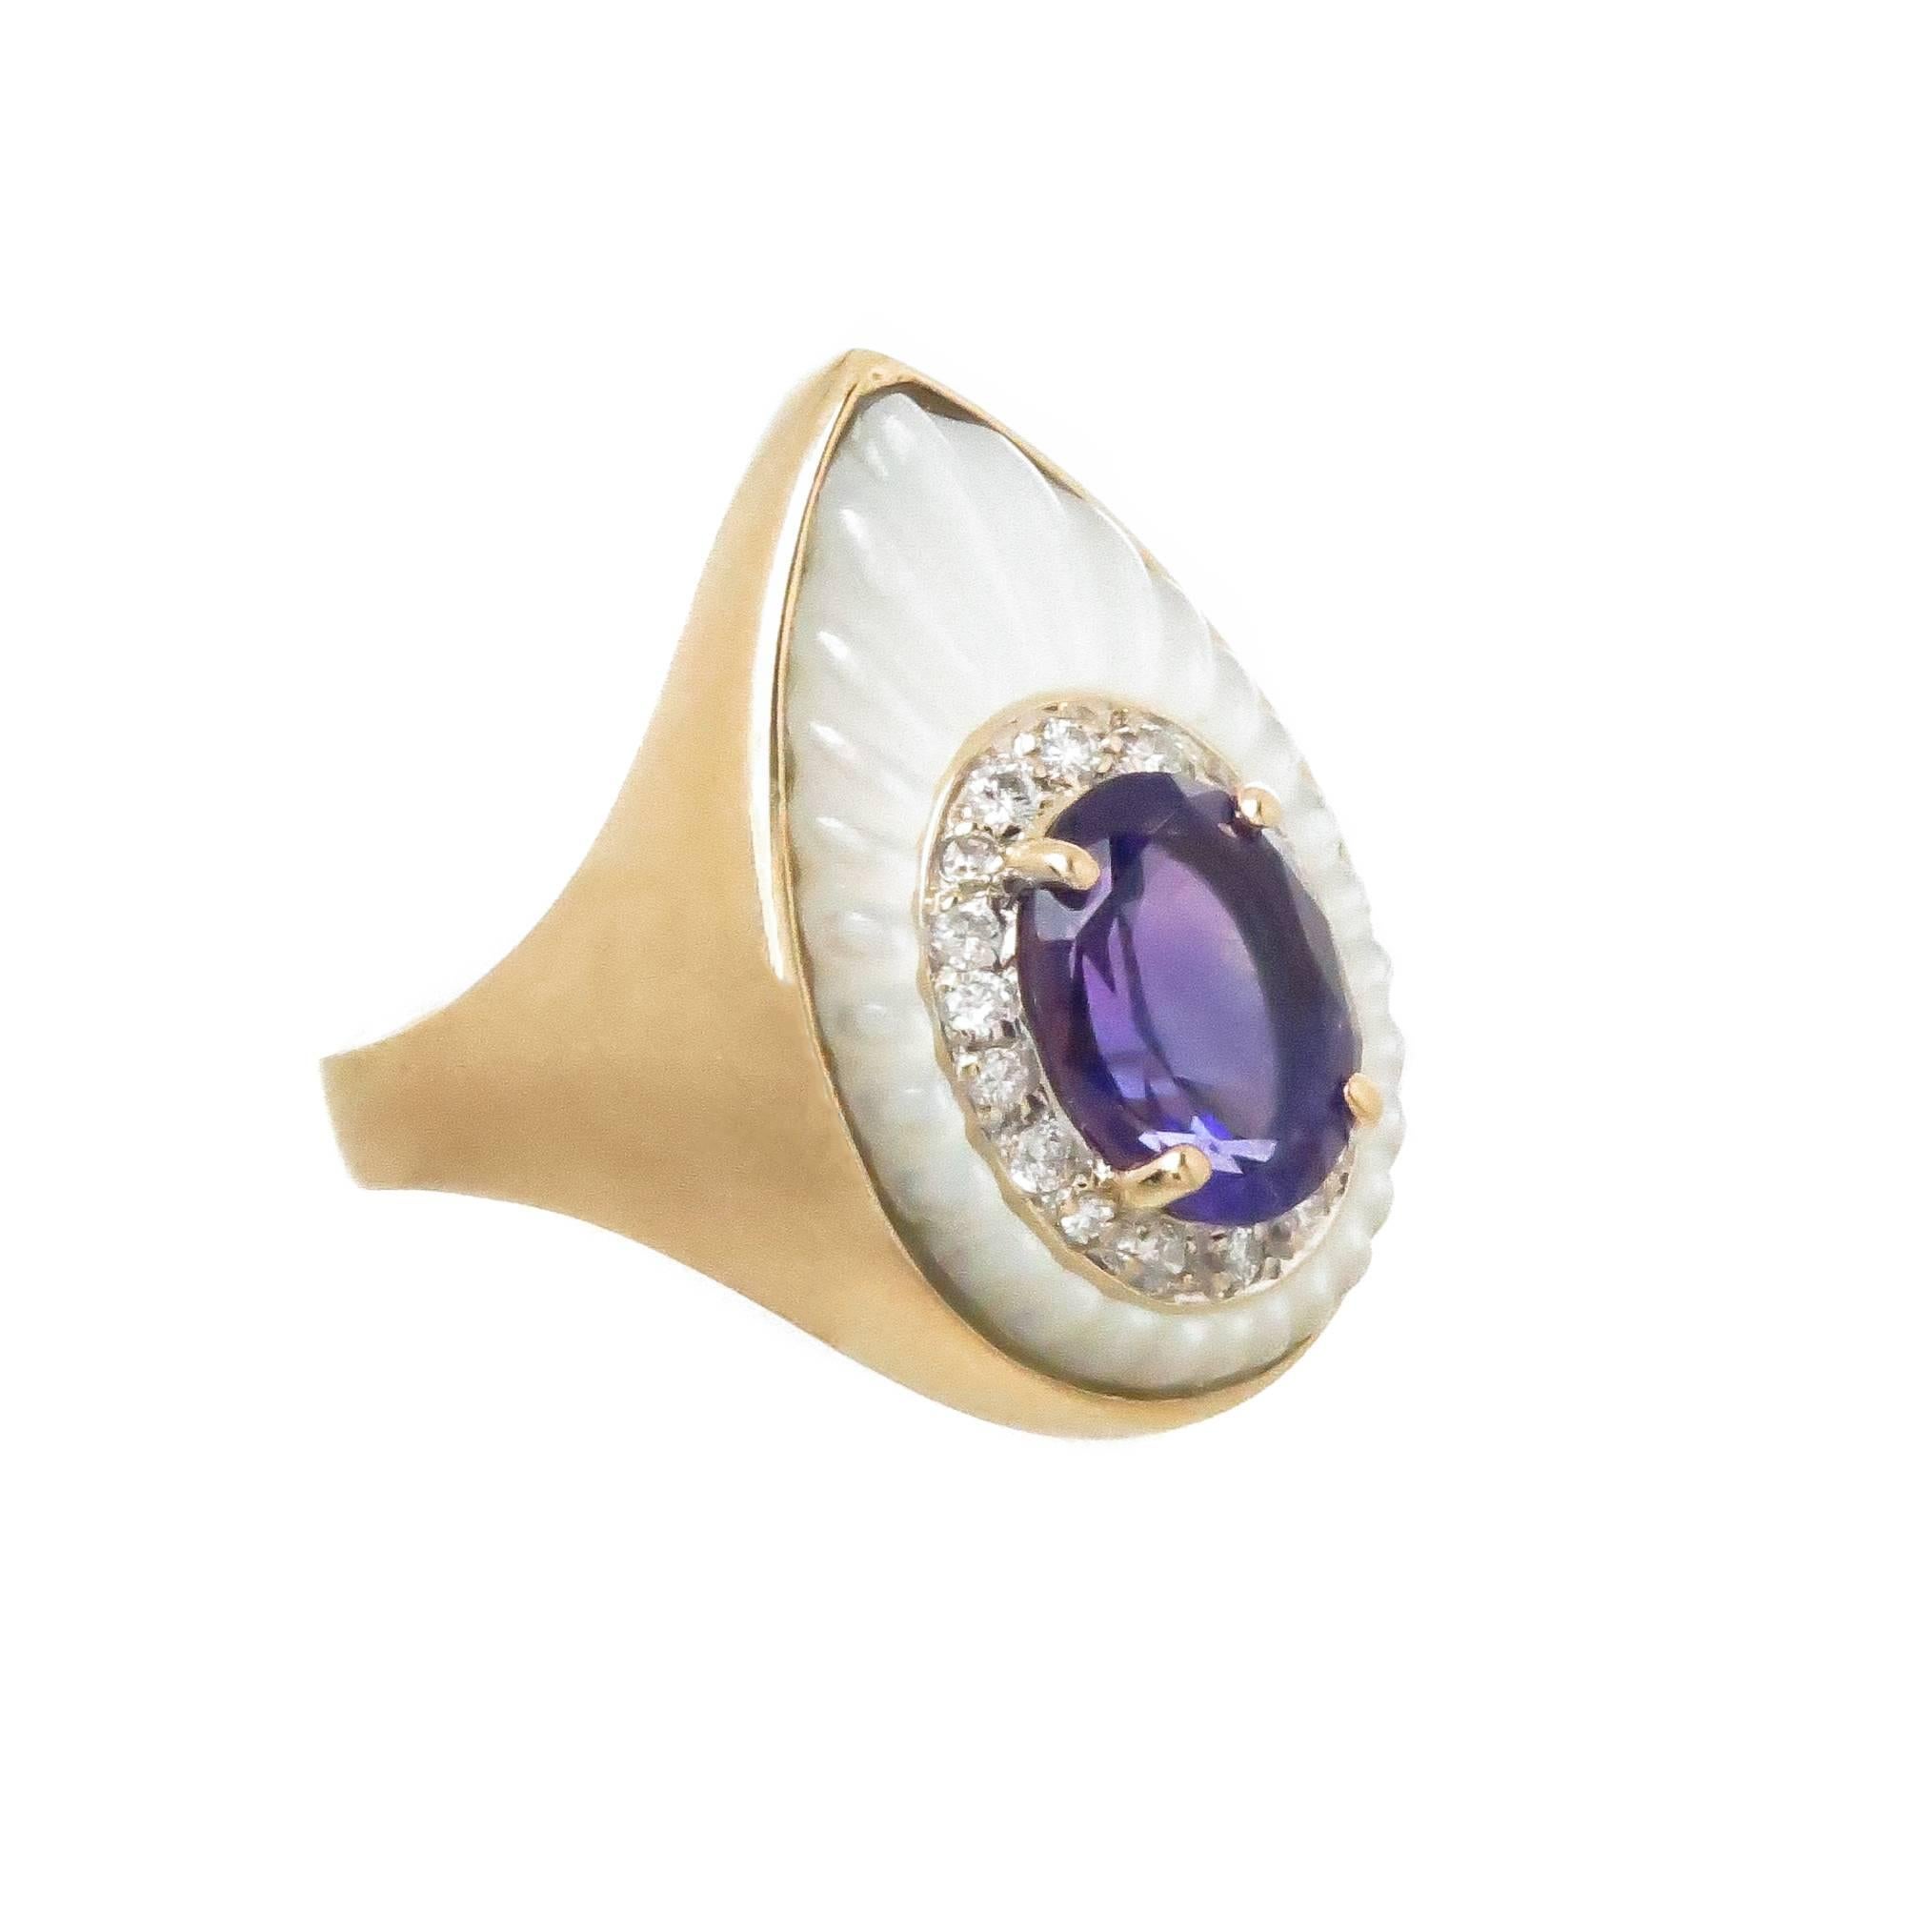 Circa 1980 Erte Clair De Lune Ring, 14K Yellow Gold, Mother of Pearl and centrally set with an oval Amethyst surrounded by Diamonds. Ring top measurements 7/8 inch in length X 1/2 inch. Finger size = 7